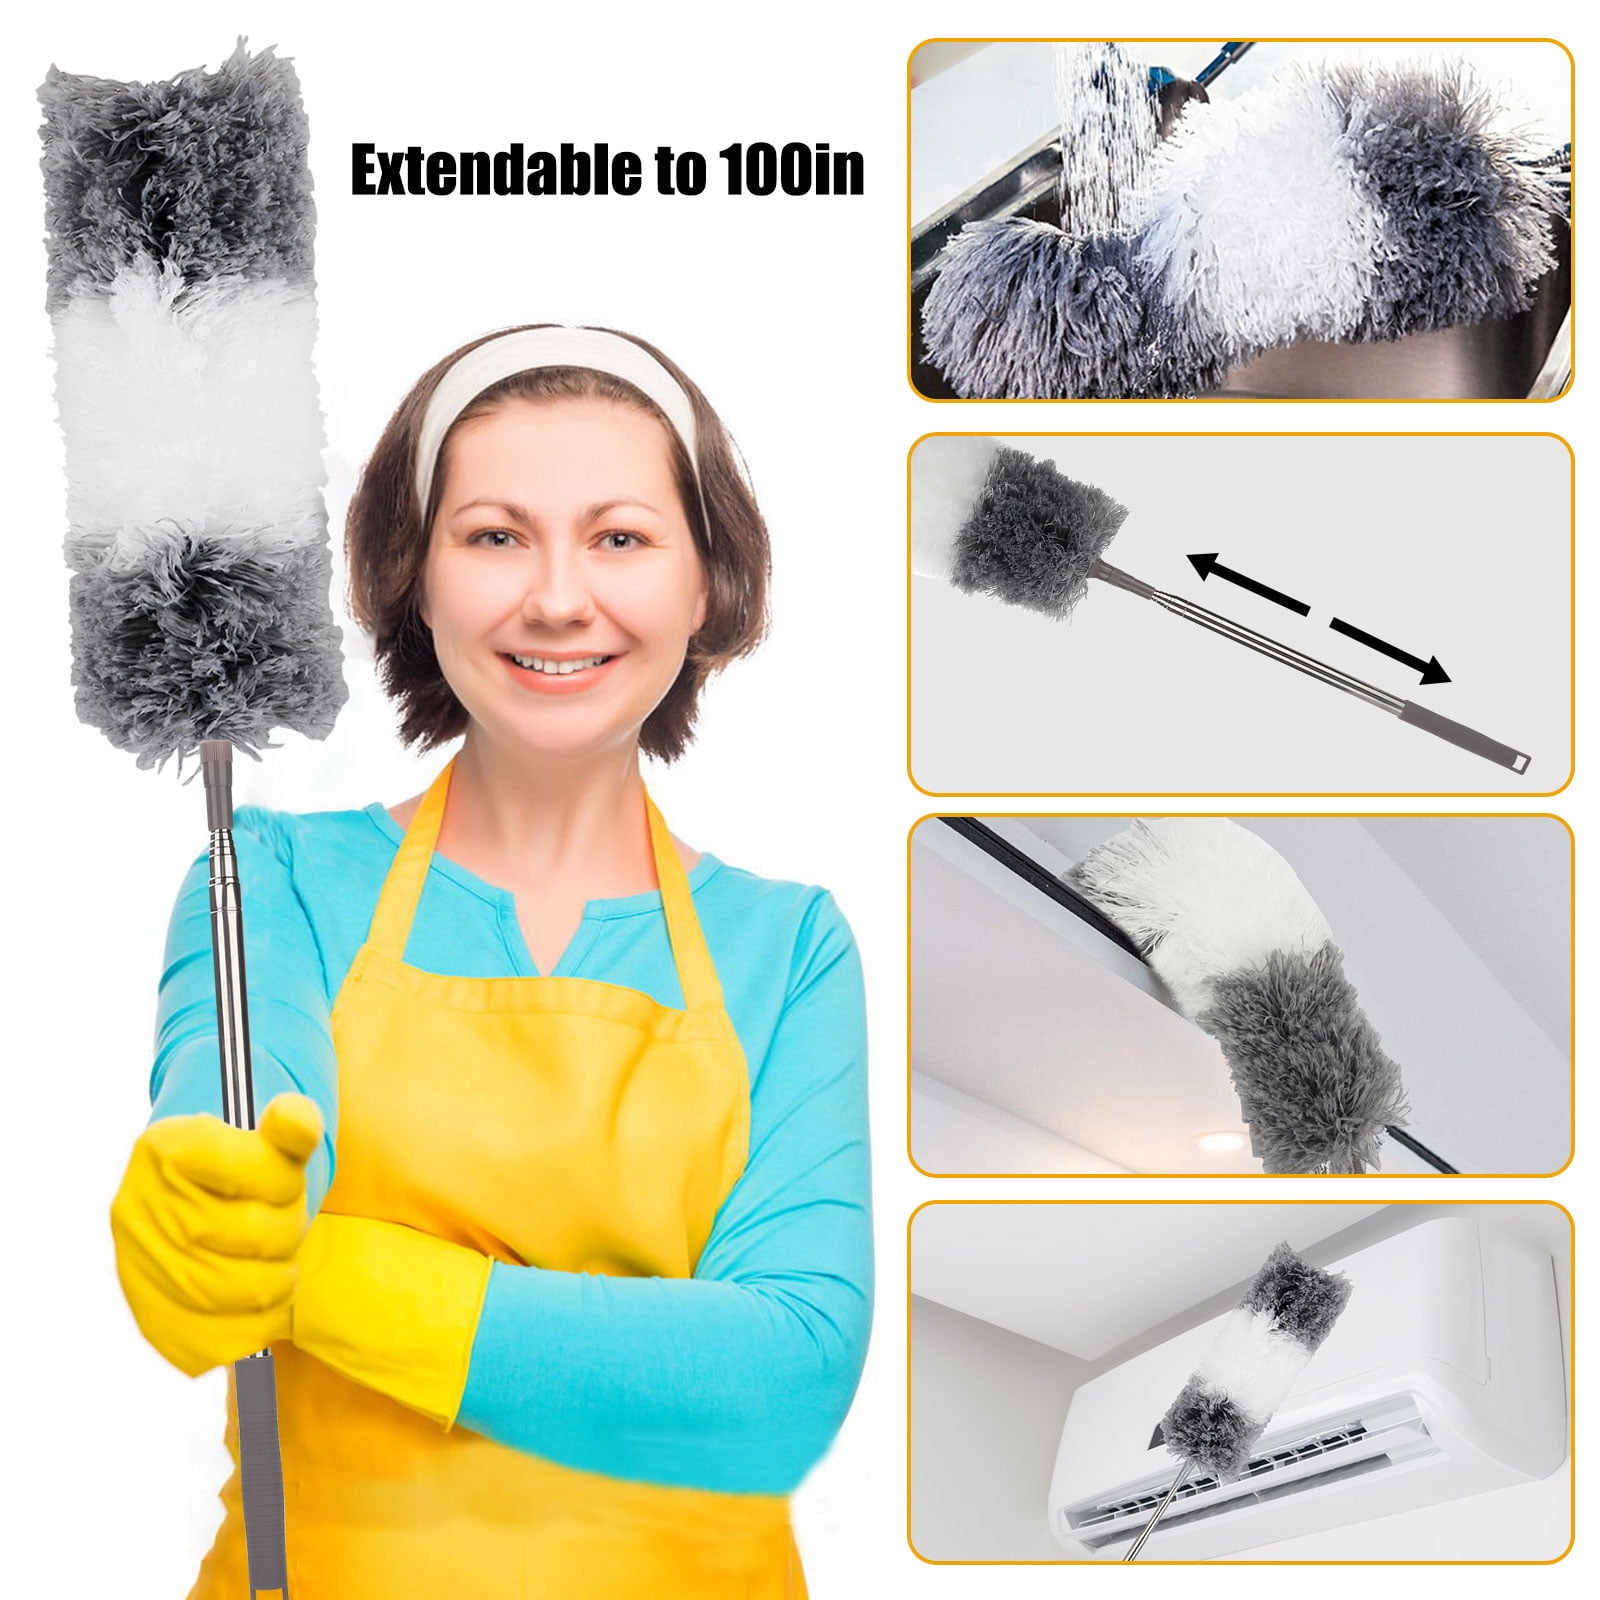 Dusters for Cleaning Microfiber Feather Dusters 100 In for High Ceiling Telescoping Home Cleaning Supplies for Blinds Furniture Car Blue New Upgraded Fan Duster with Extension Pole Stainless Steel 